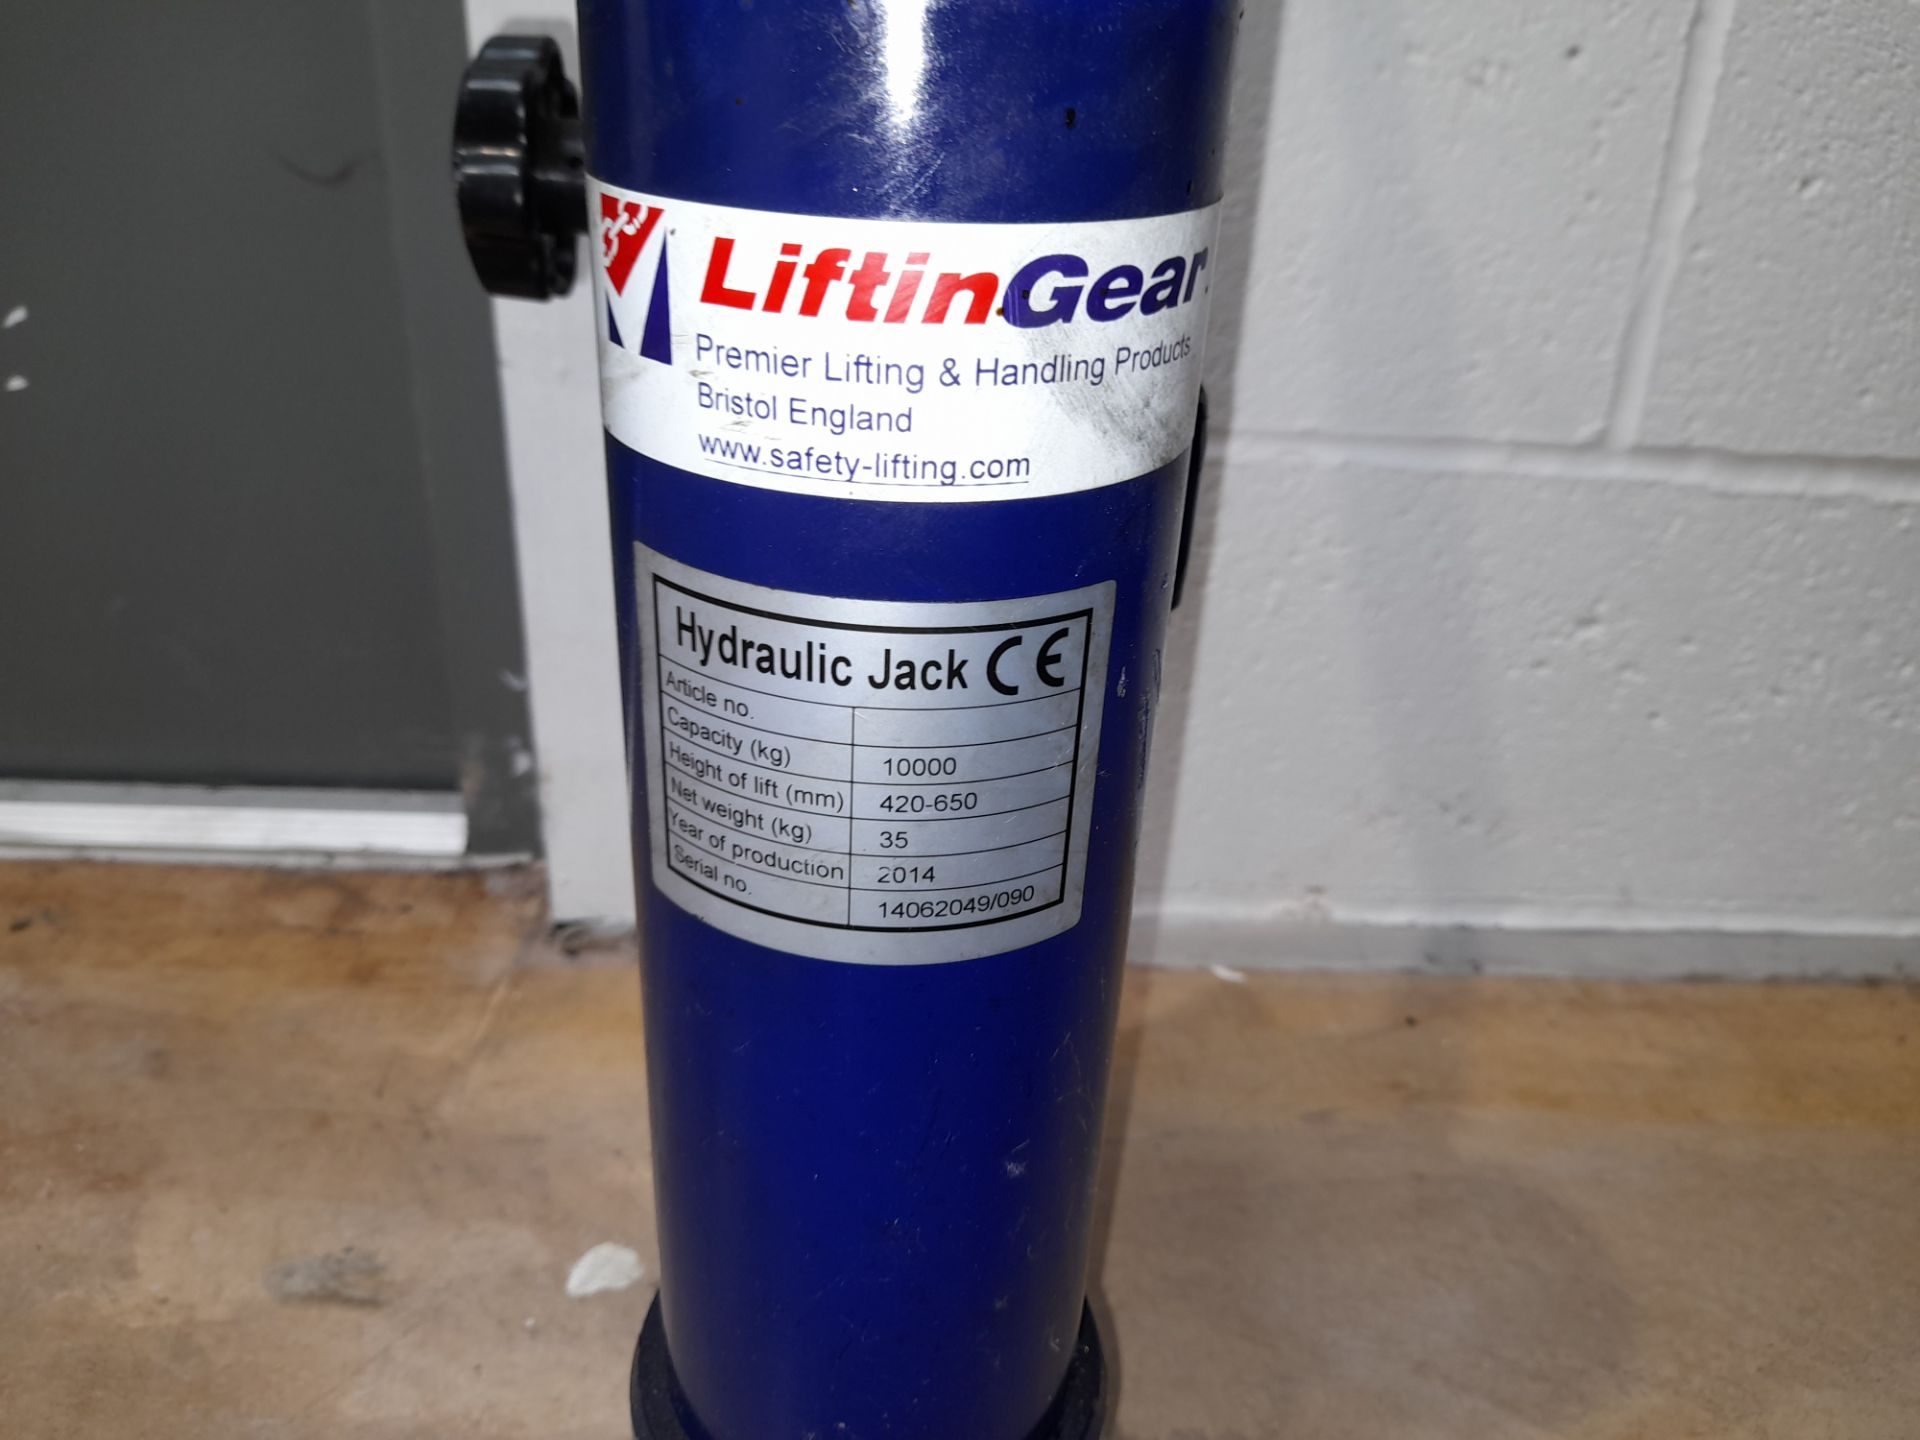 Liftingear 10,000kg Hydraulic Jack serial number 14062049/090 (2014) 420 – 650mm lift - Image 2 of 2